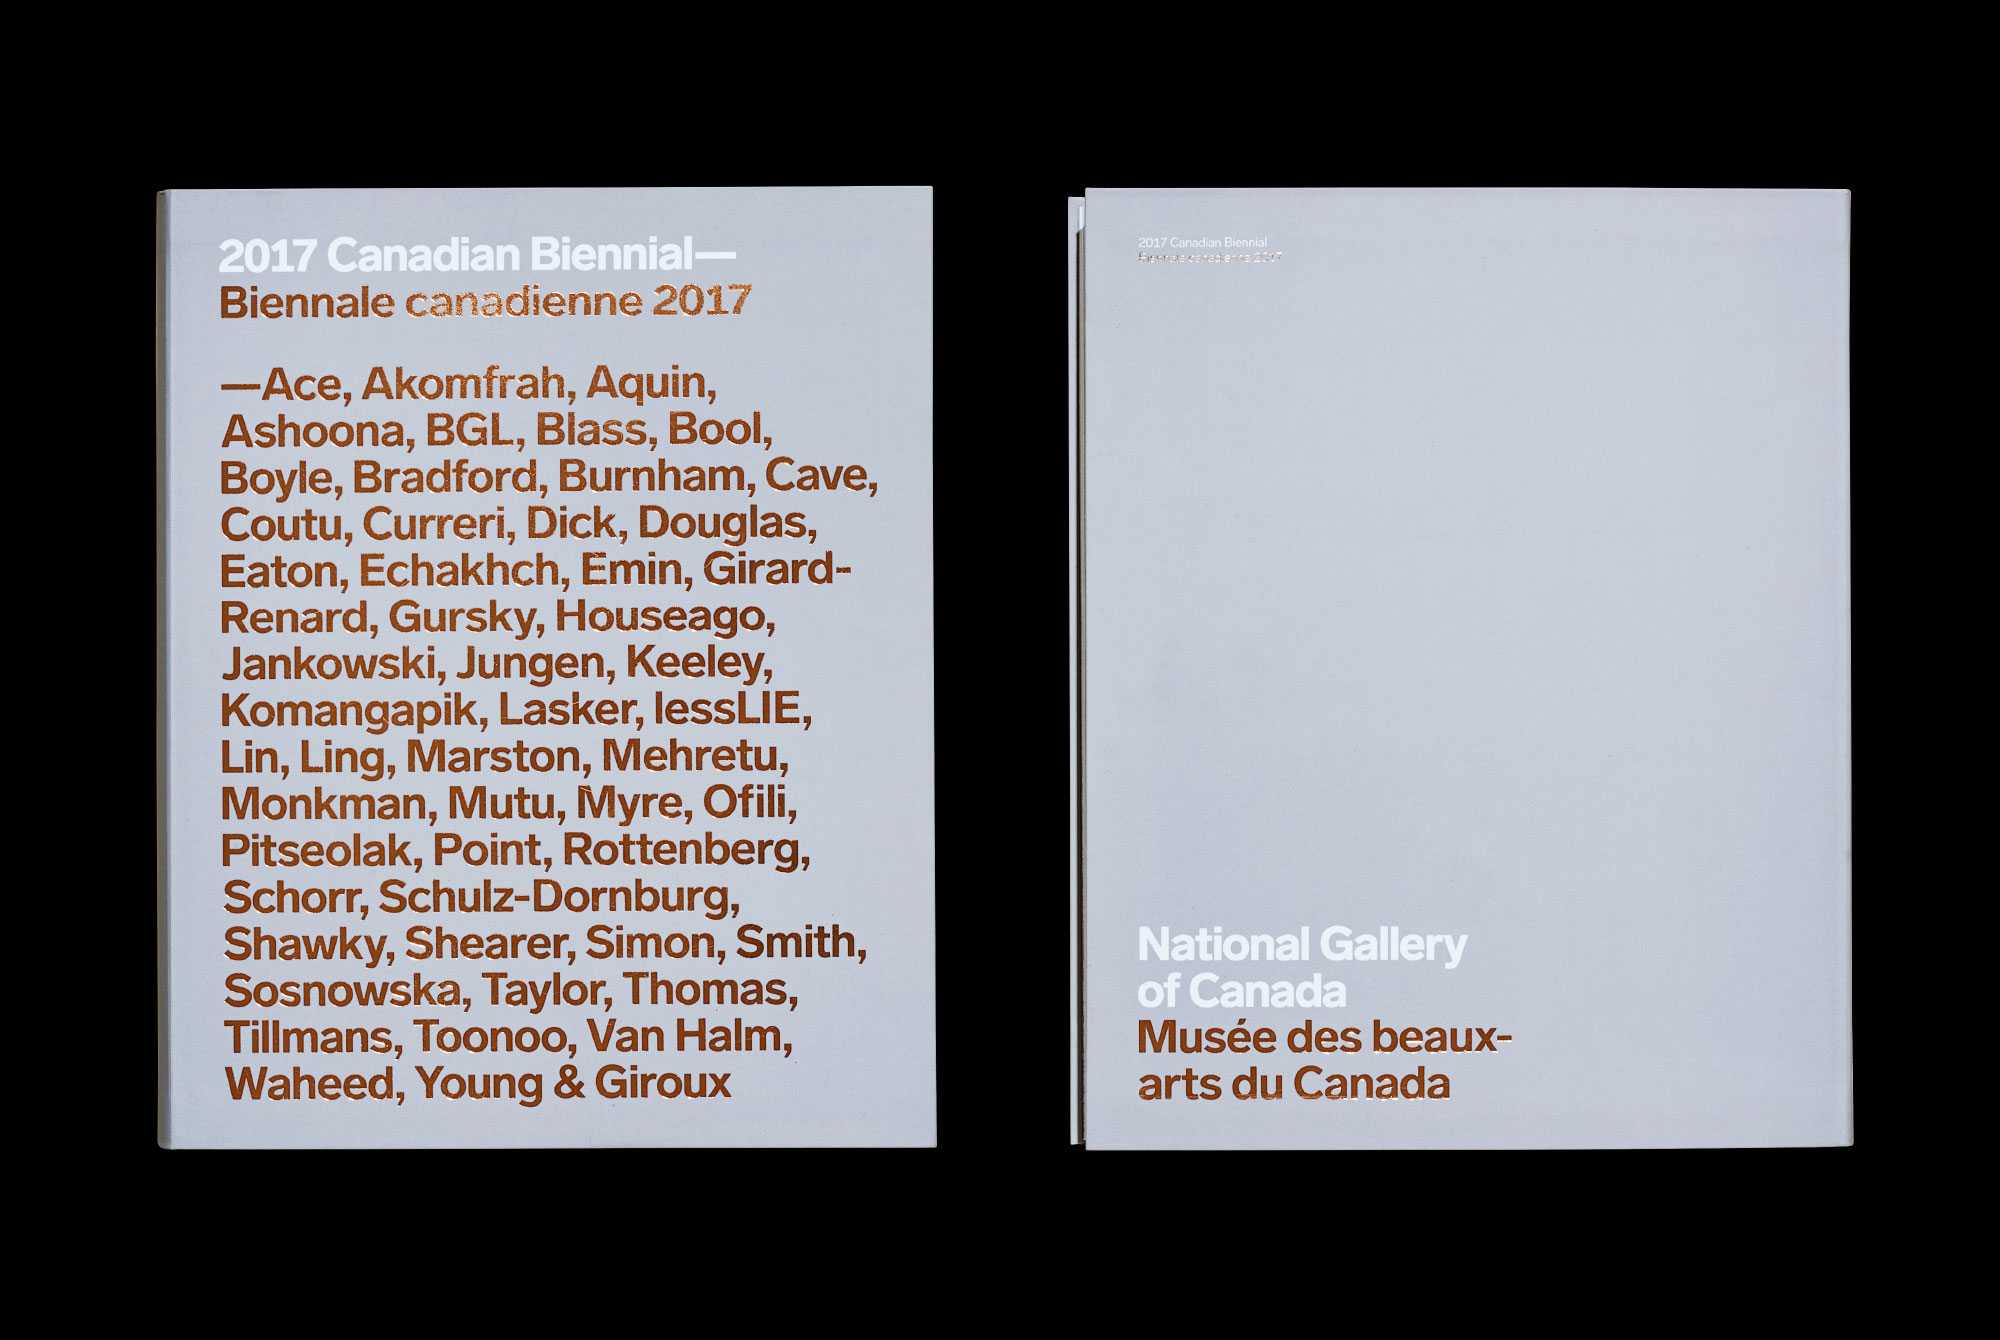 Canadian Biennial 2017 front and back cover